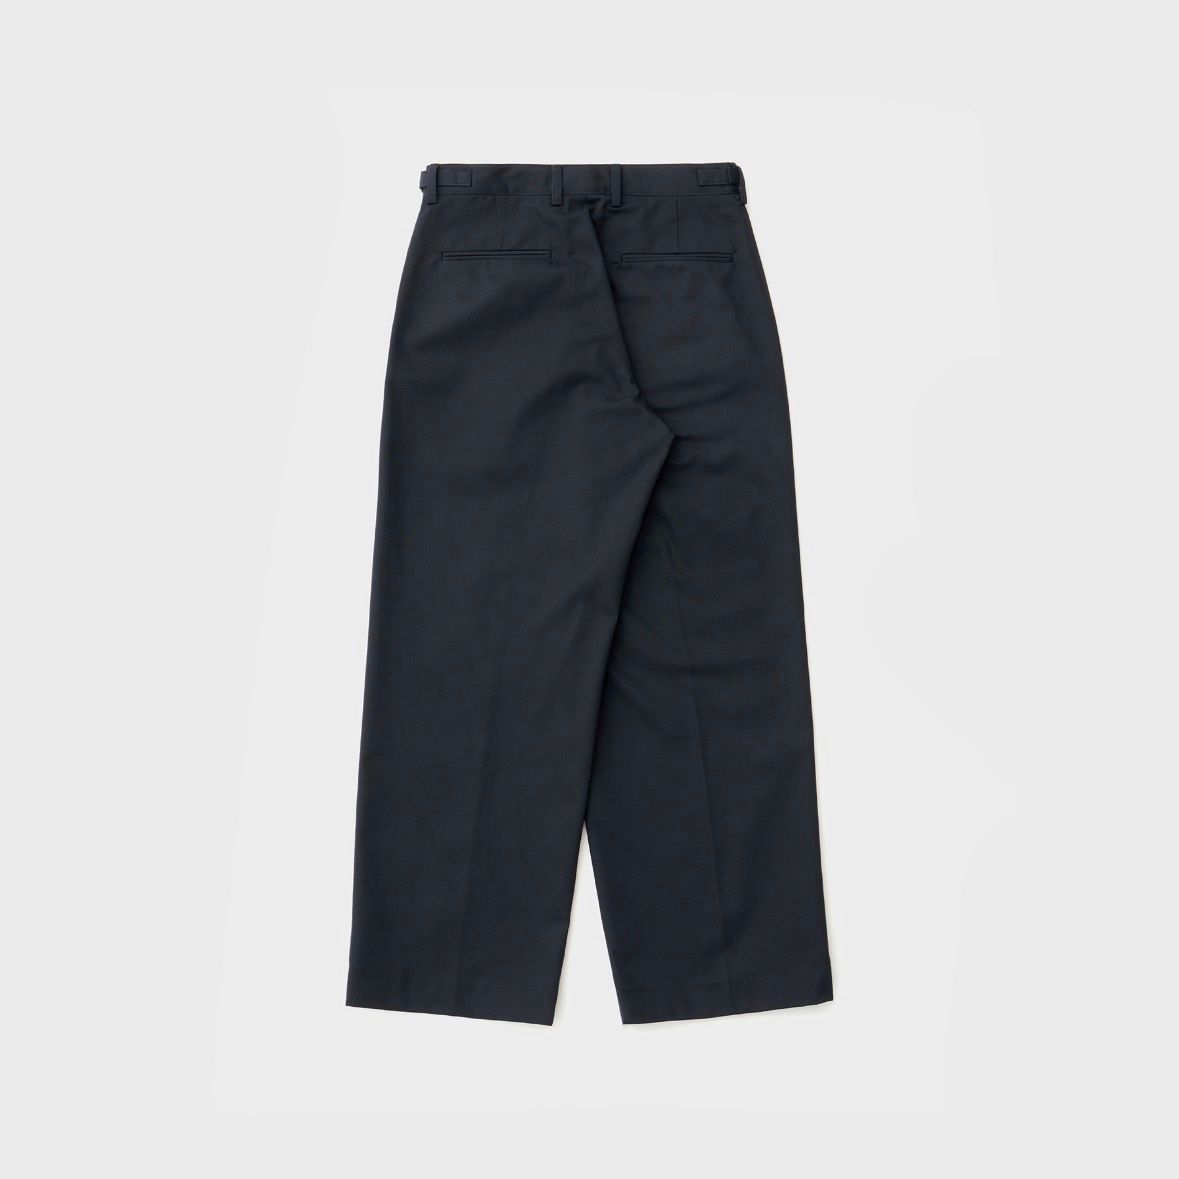 ANOTHER OFFICE - 【残り一点】M-41 Wide Chino Pants | ACRMTSM 